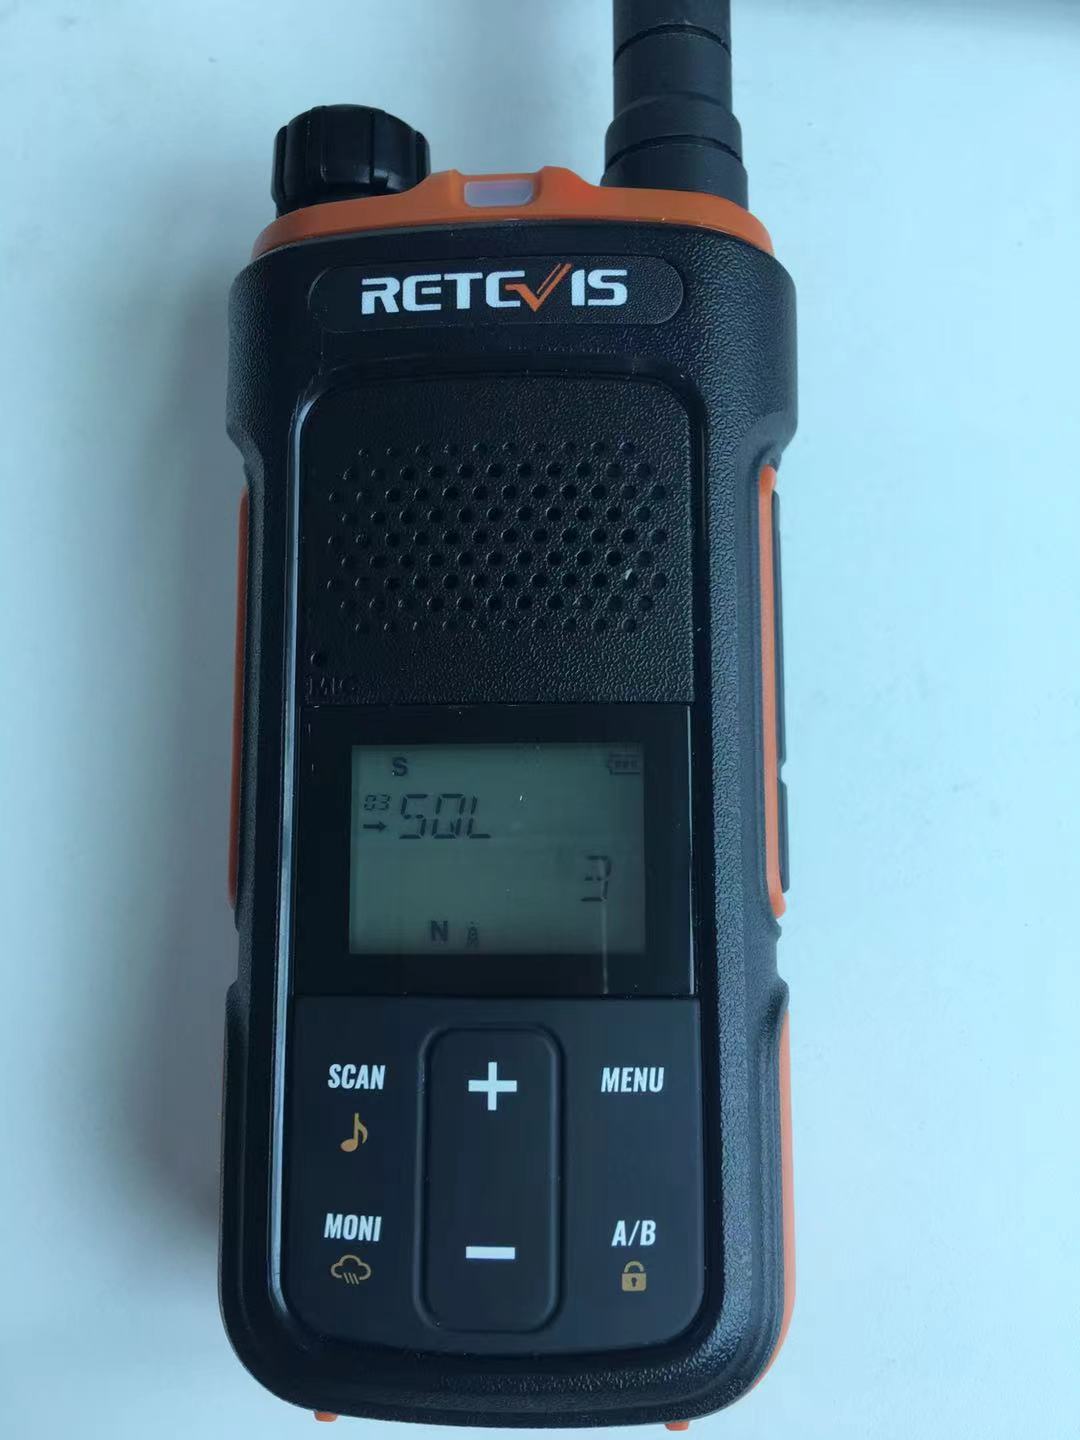 Set the squelch level for Retevis RB27 GMRS farm radio by MANU Key